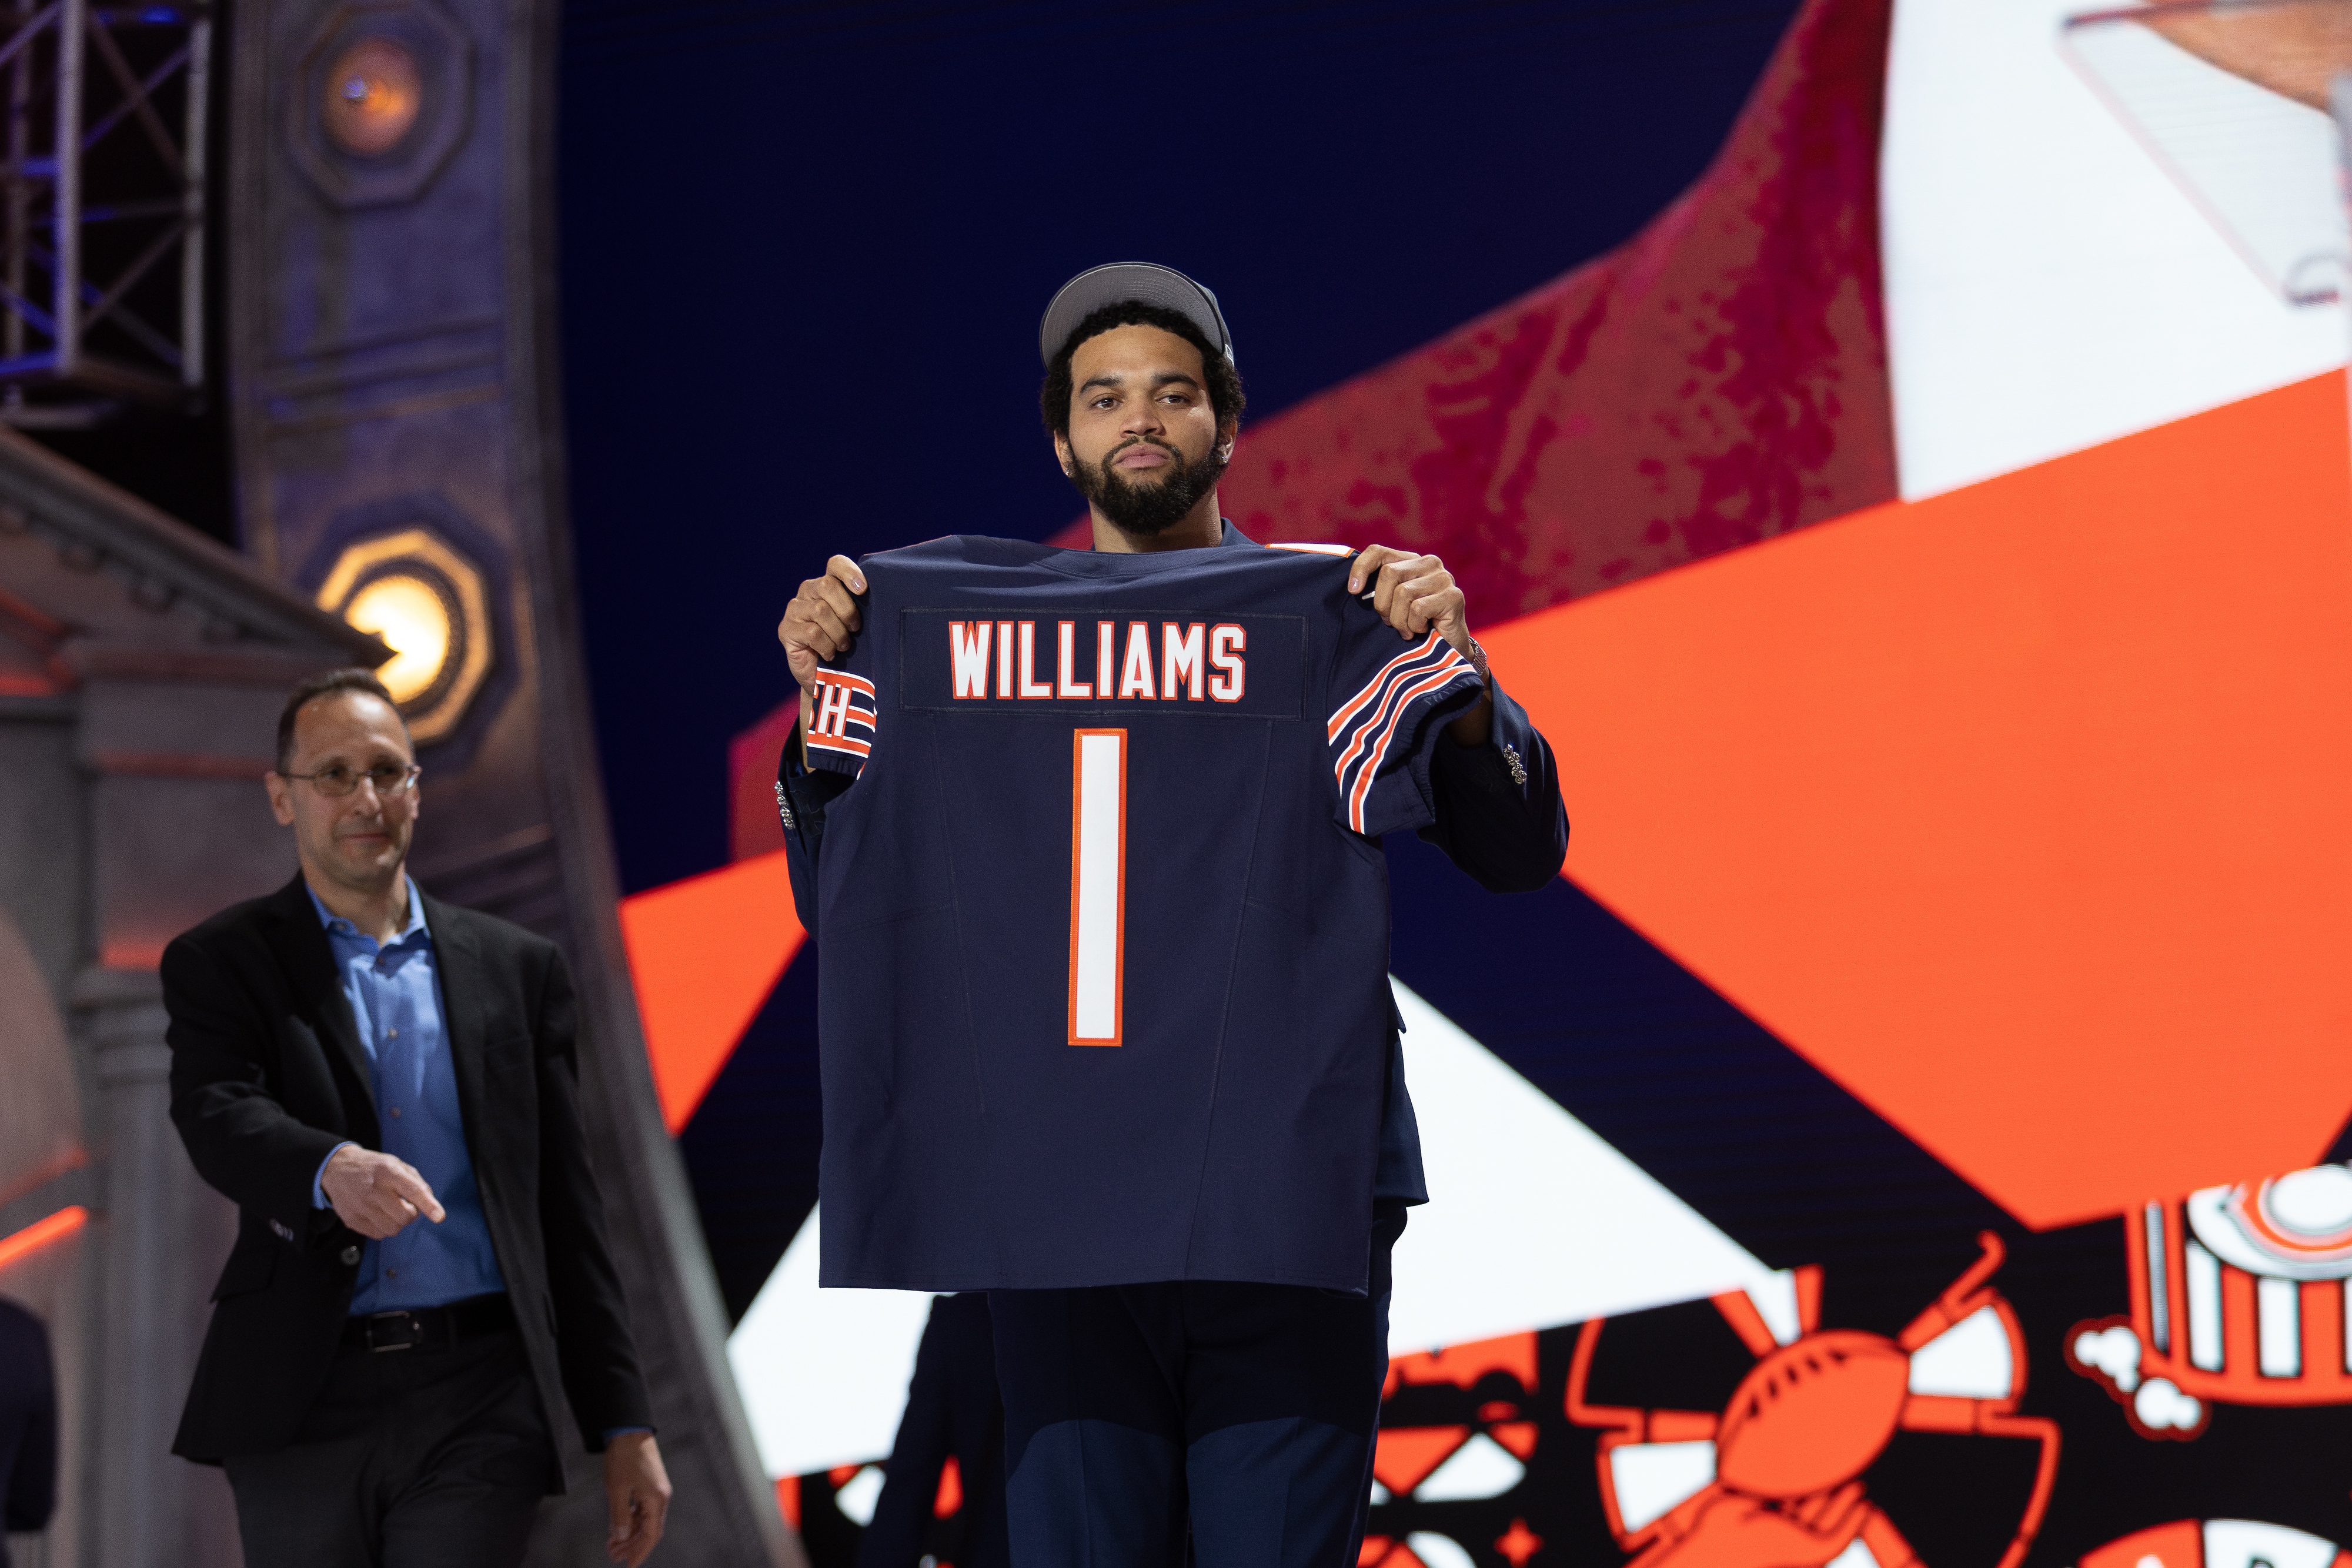 Person on stage holding a sports jersey with &quot;WILLIAMS 1&quot; on it at a draft event, with a graphic backdrop and another individual nearby